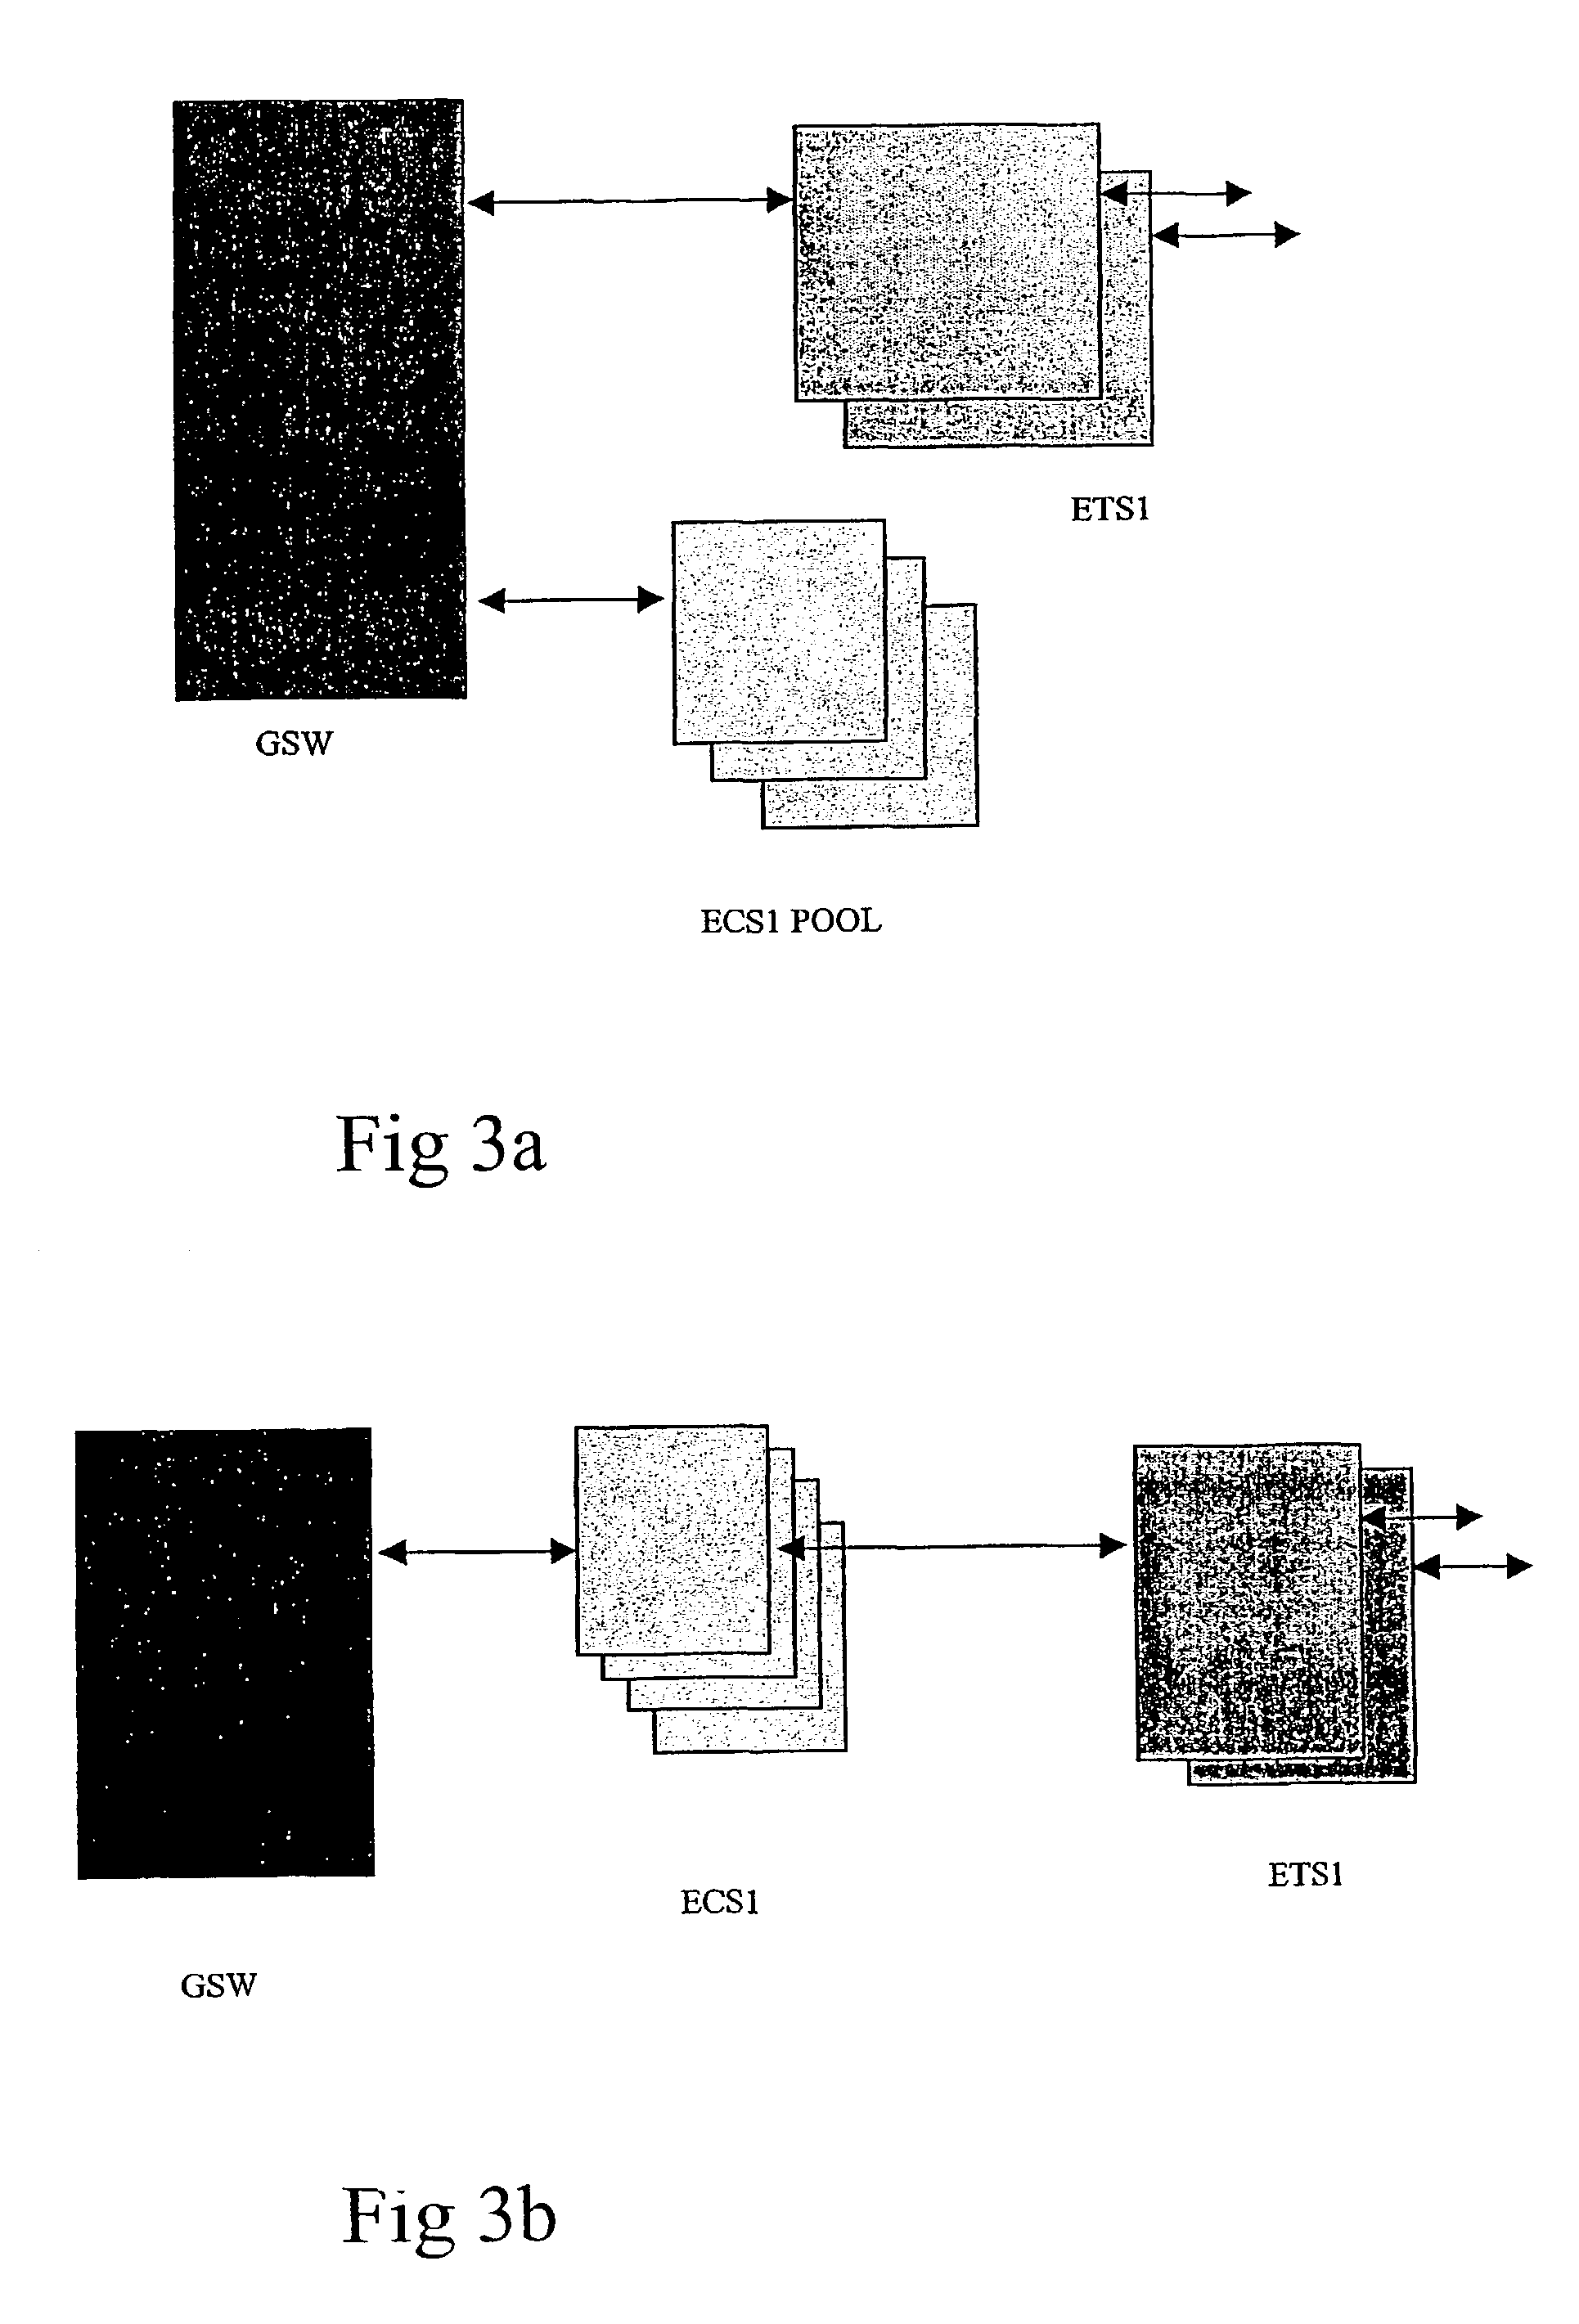 Method and system for processing telecommunication signals